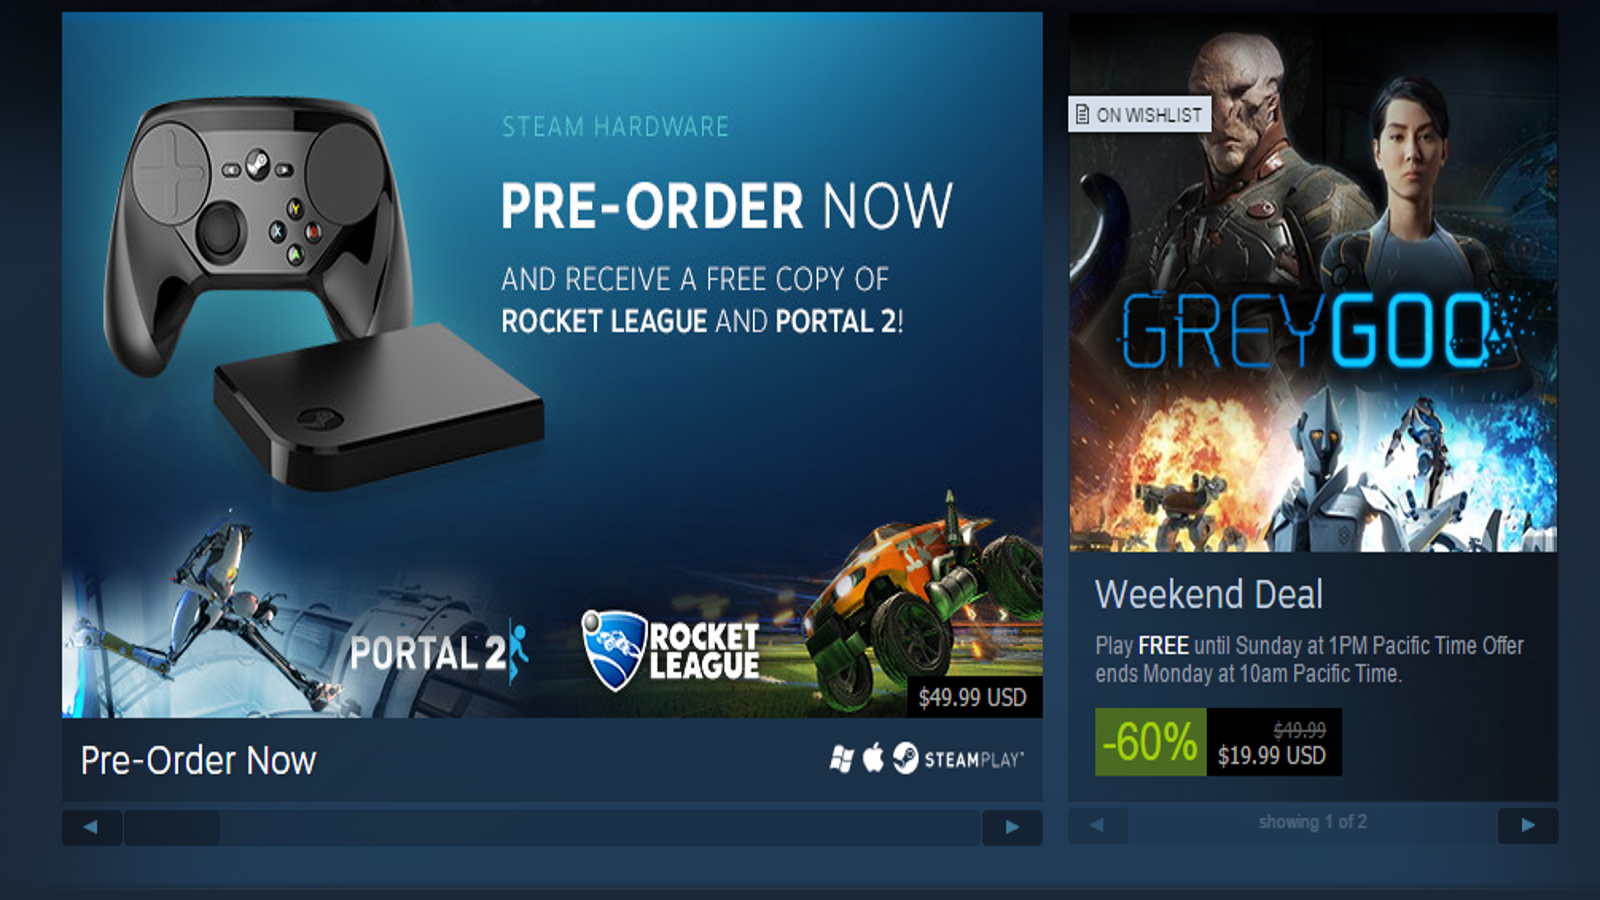 Valve's Steam OS is available for download now, if you dare – GeekWire